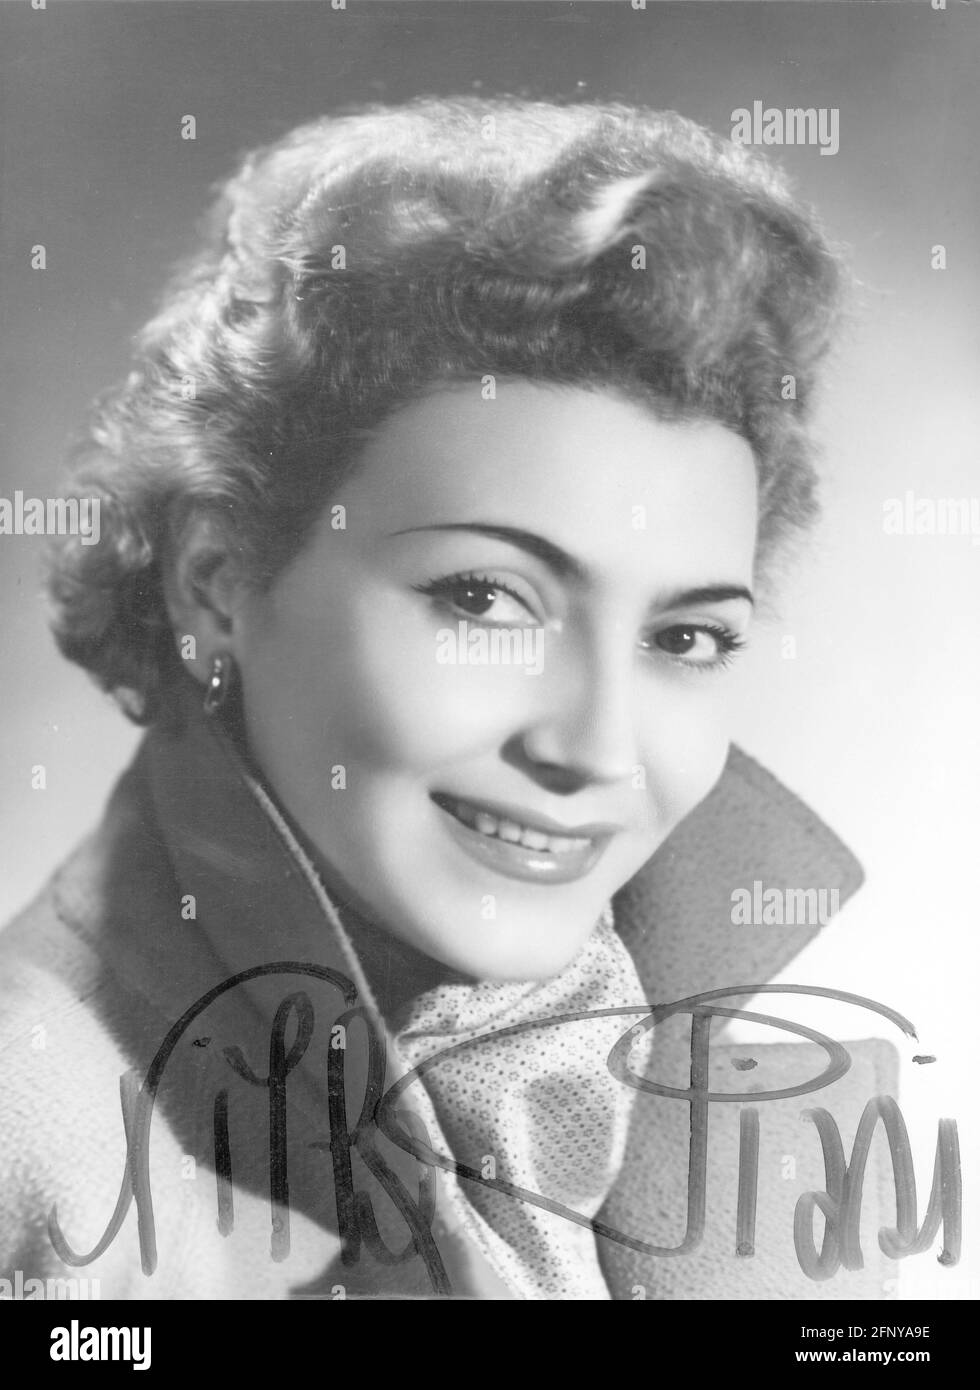 Pizzi, Nilla, 16.4.1919 - 12.3.2011, Italian singer, portrait, 1950s, ADDITIONAL-RIGHTS-CLEARANCE-INFO-NOT-AVAILABLE Stock Photo